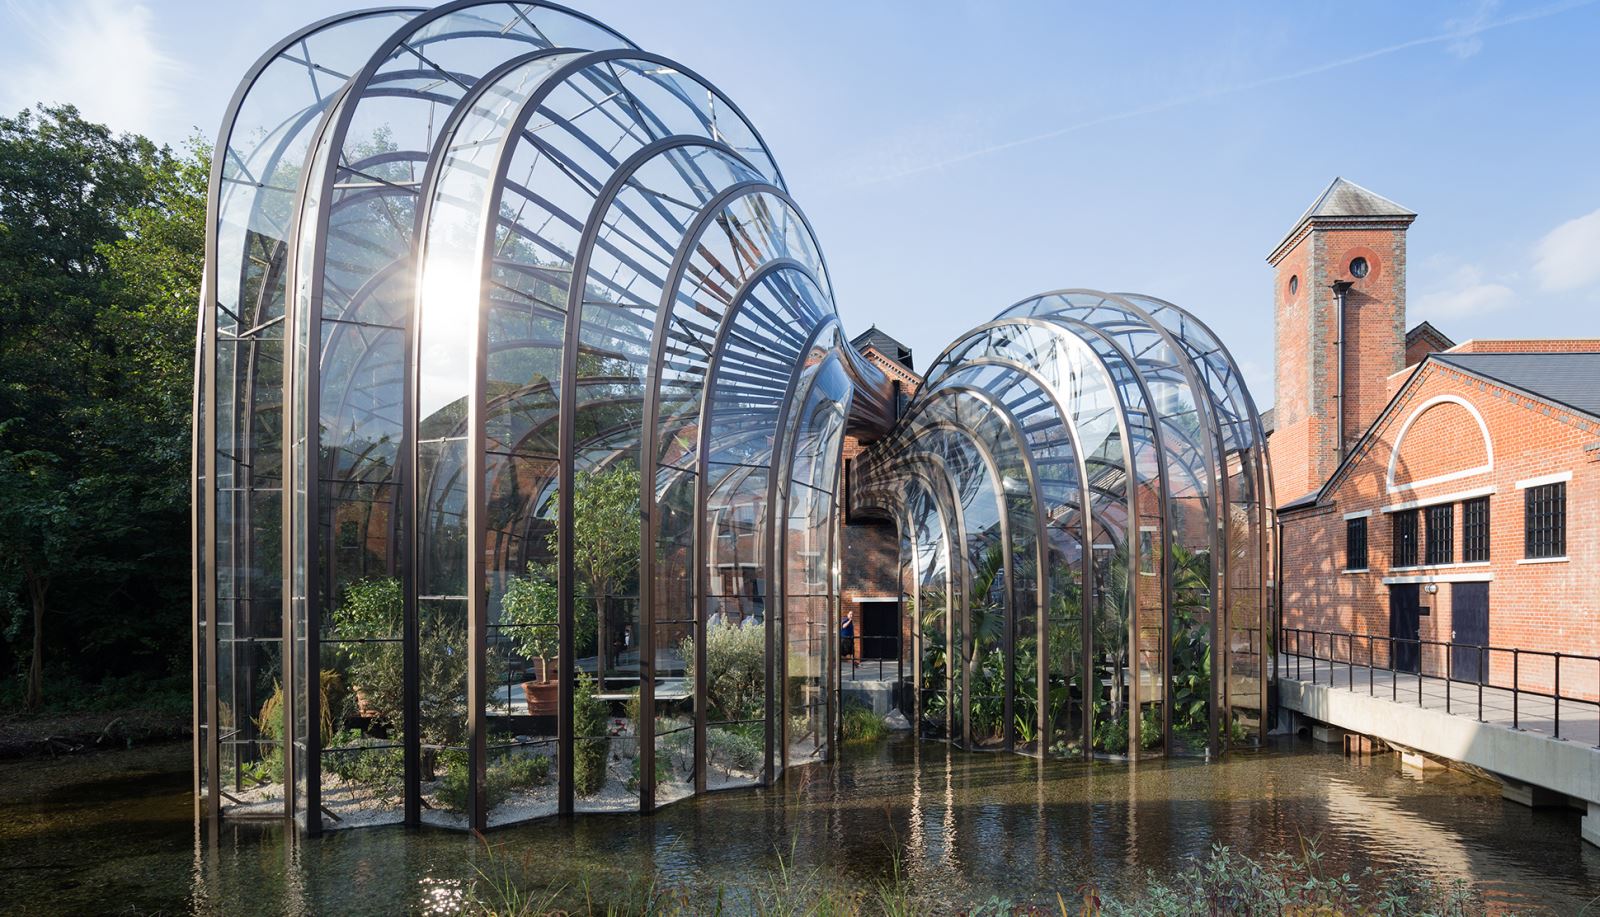 Bombay Sapphire Distillery green houses over the River Test